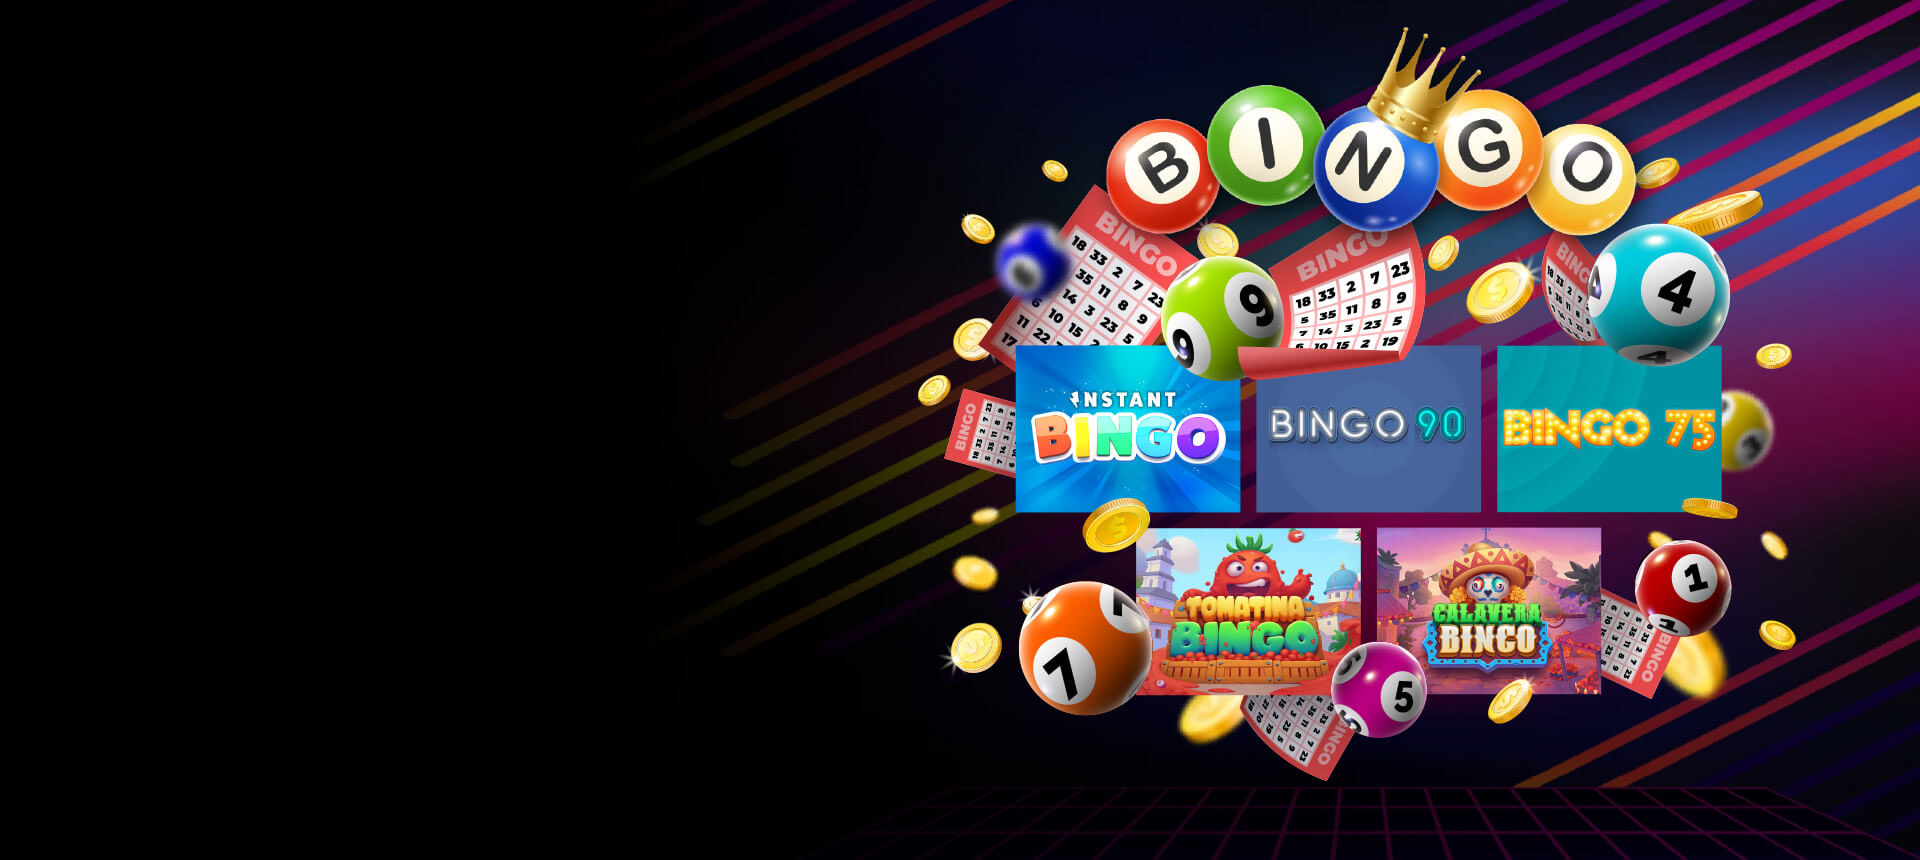 Experience the excitement of our new Bingo games!